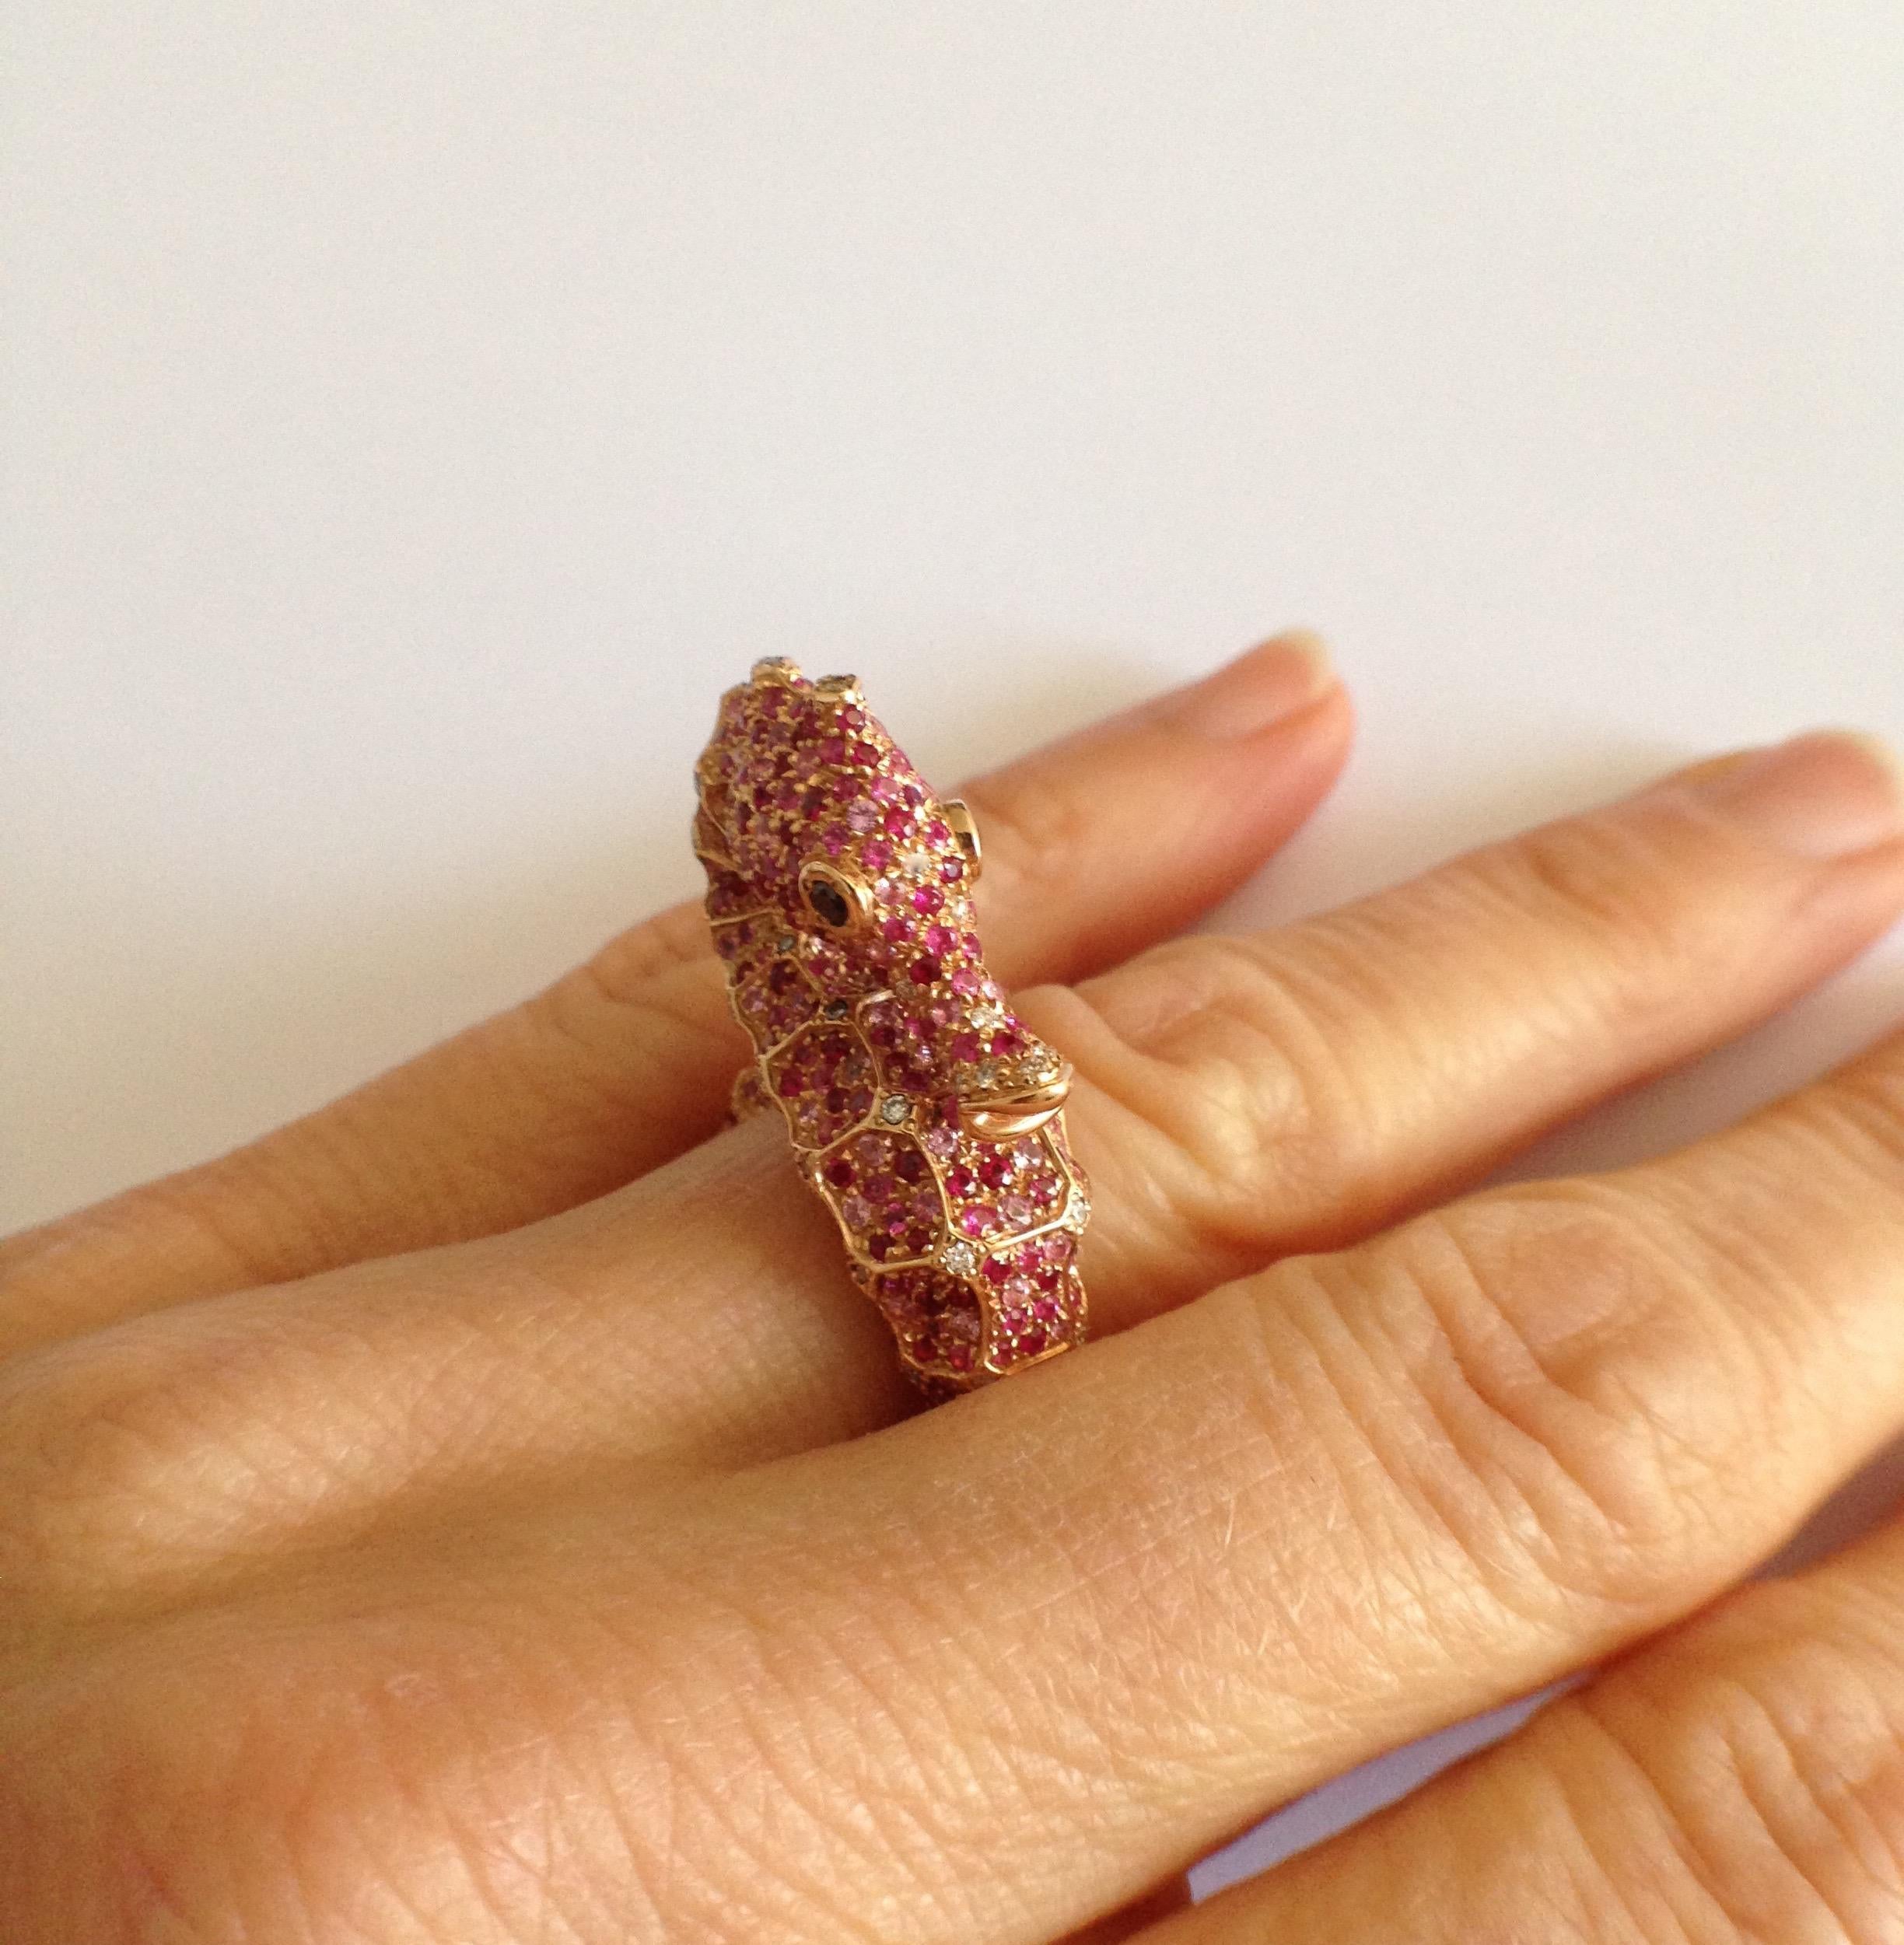 Petronilla Hippocampus Sea Horse Diamond Pink Sapphire Ruby 18Kt Gold Ring 2